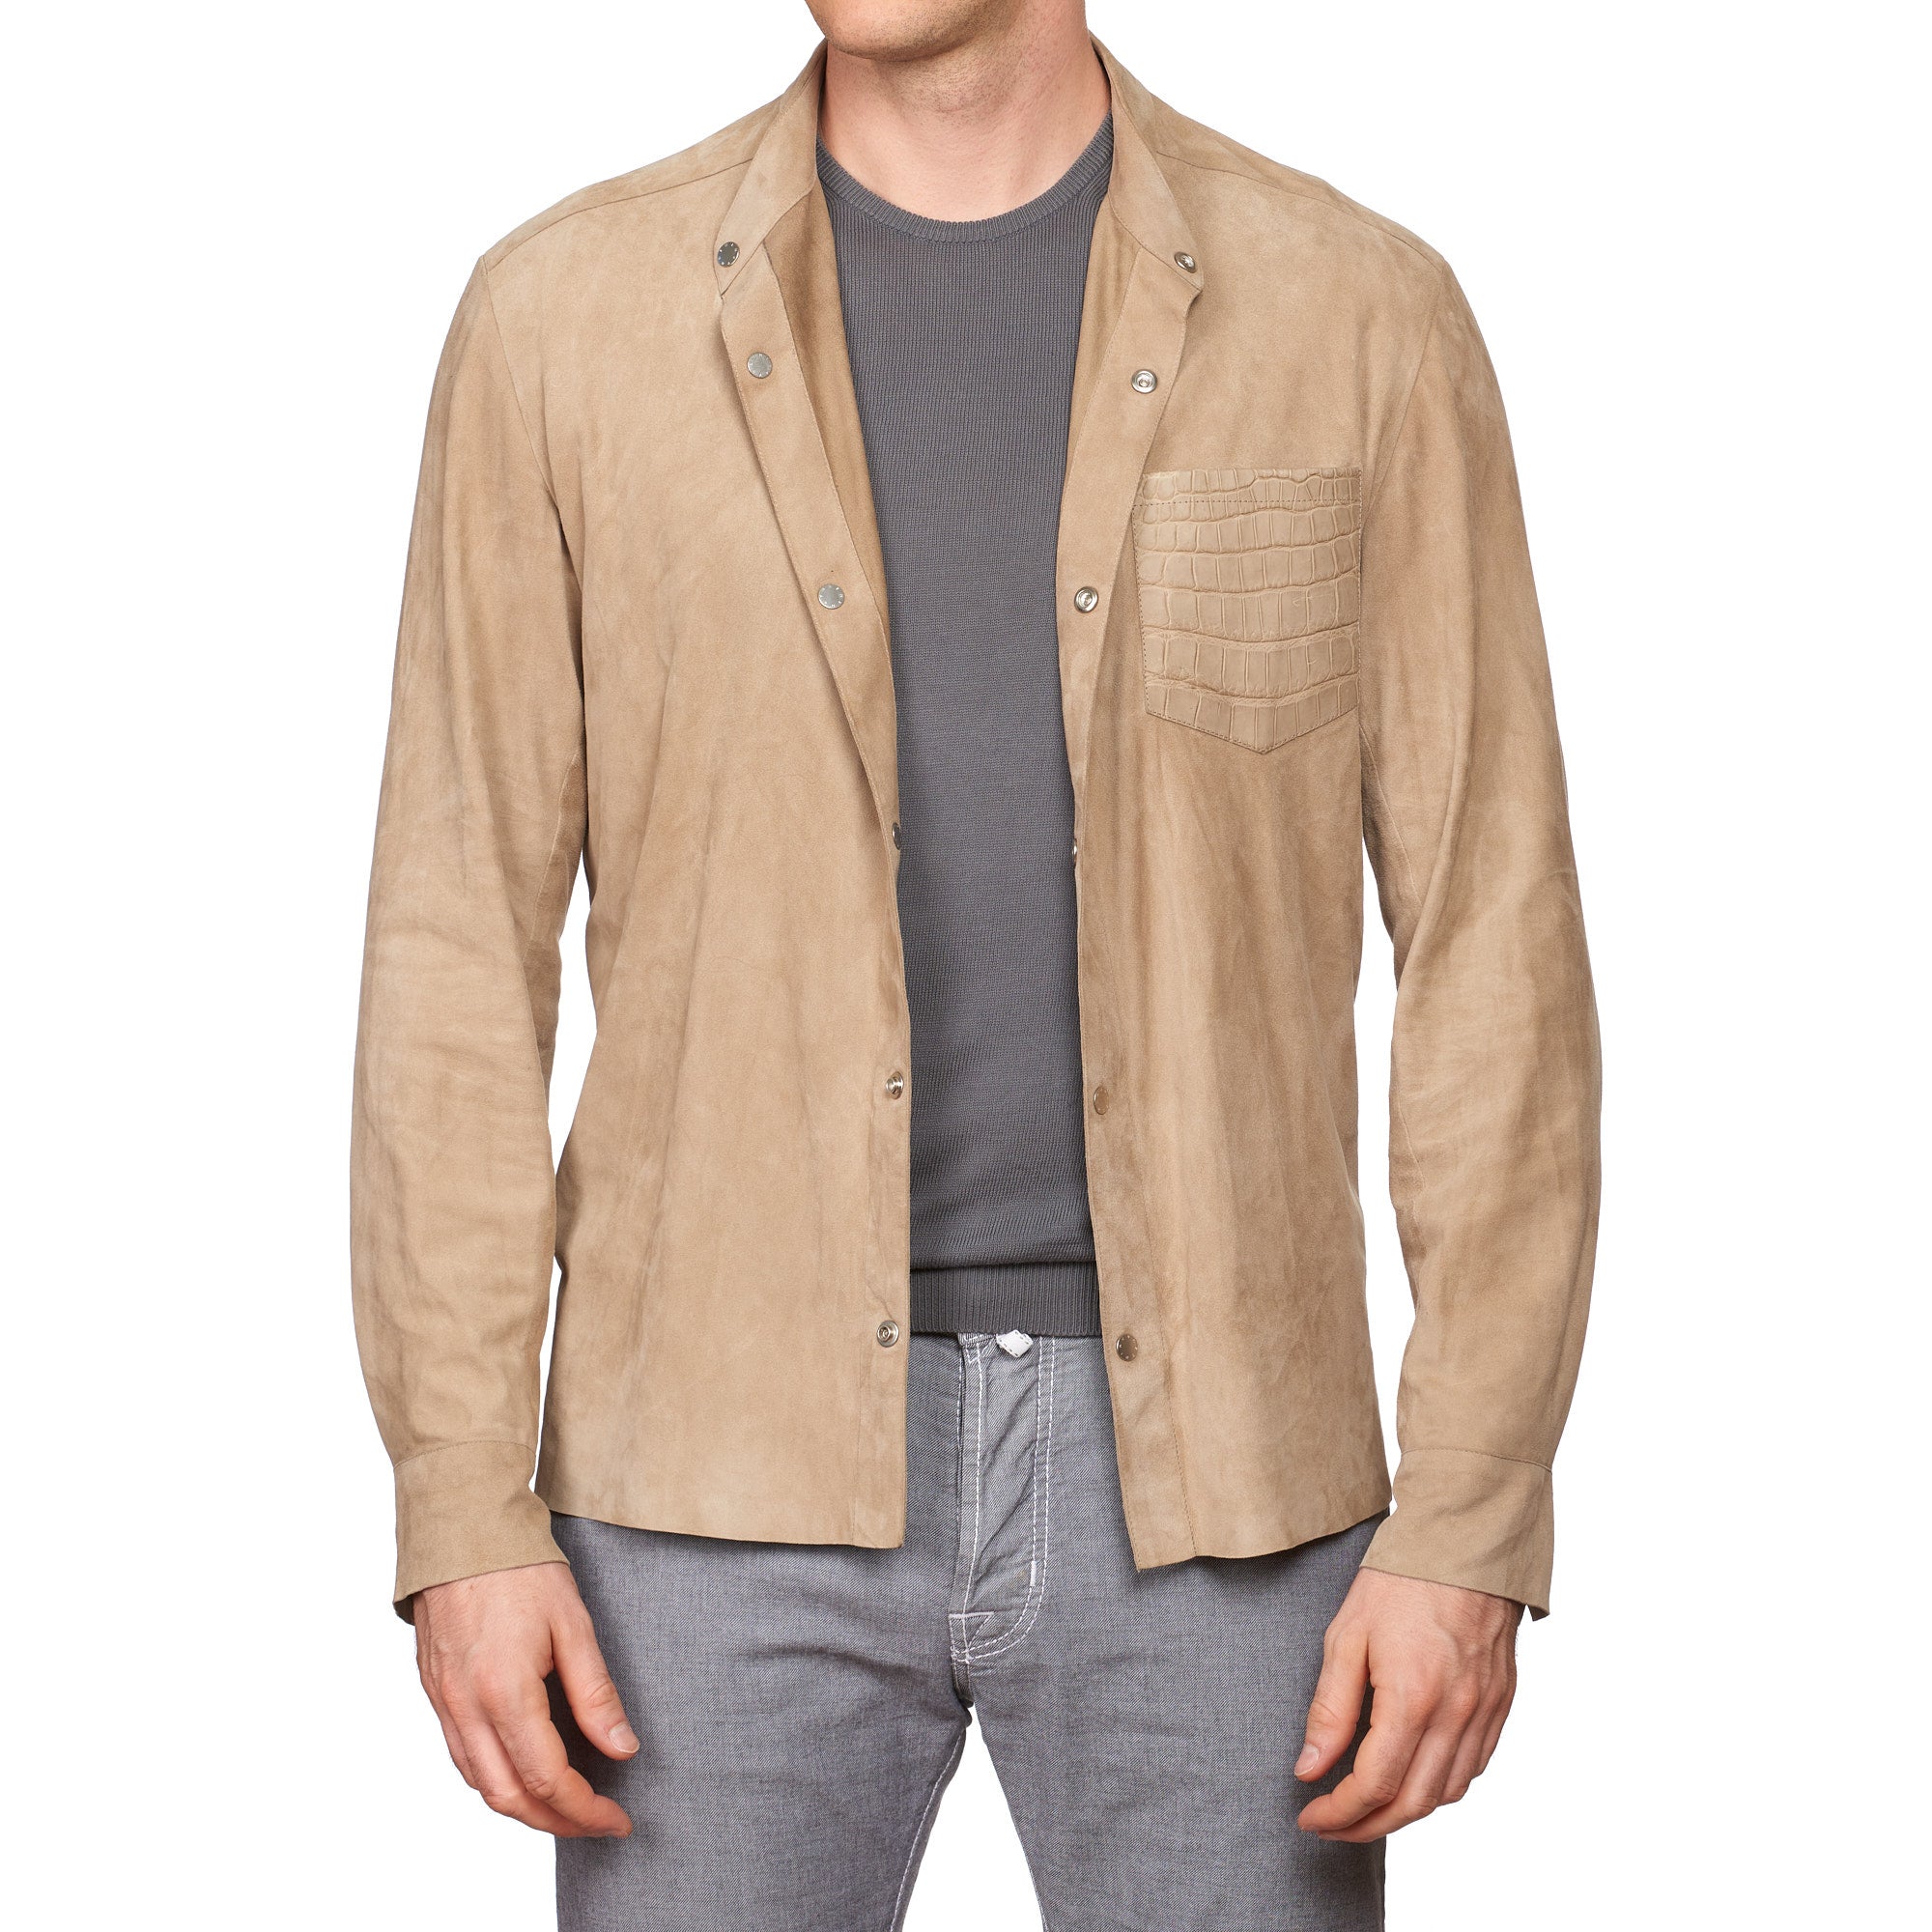 SERAPHIN Beige Goat Suede Leather Unlined Shirt Jacket with Crocodile Pocket FR 50 US M